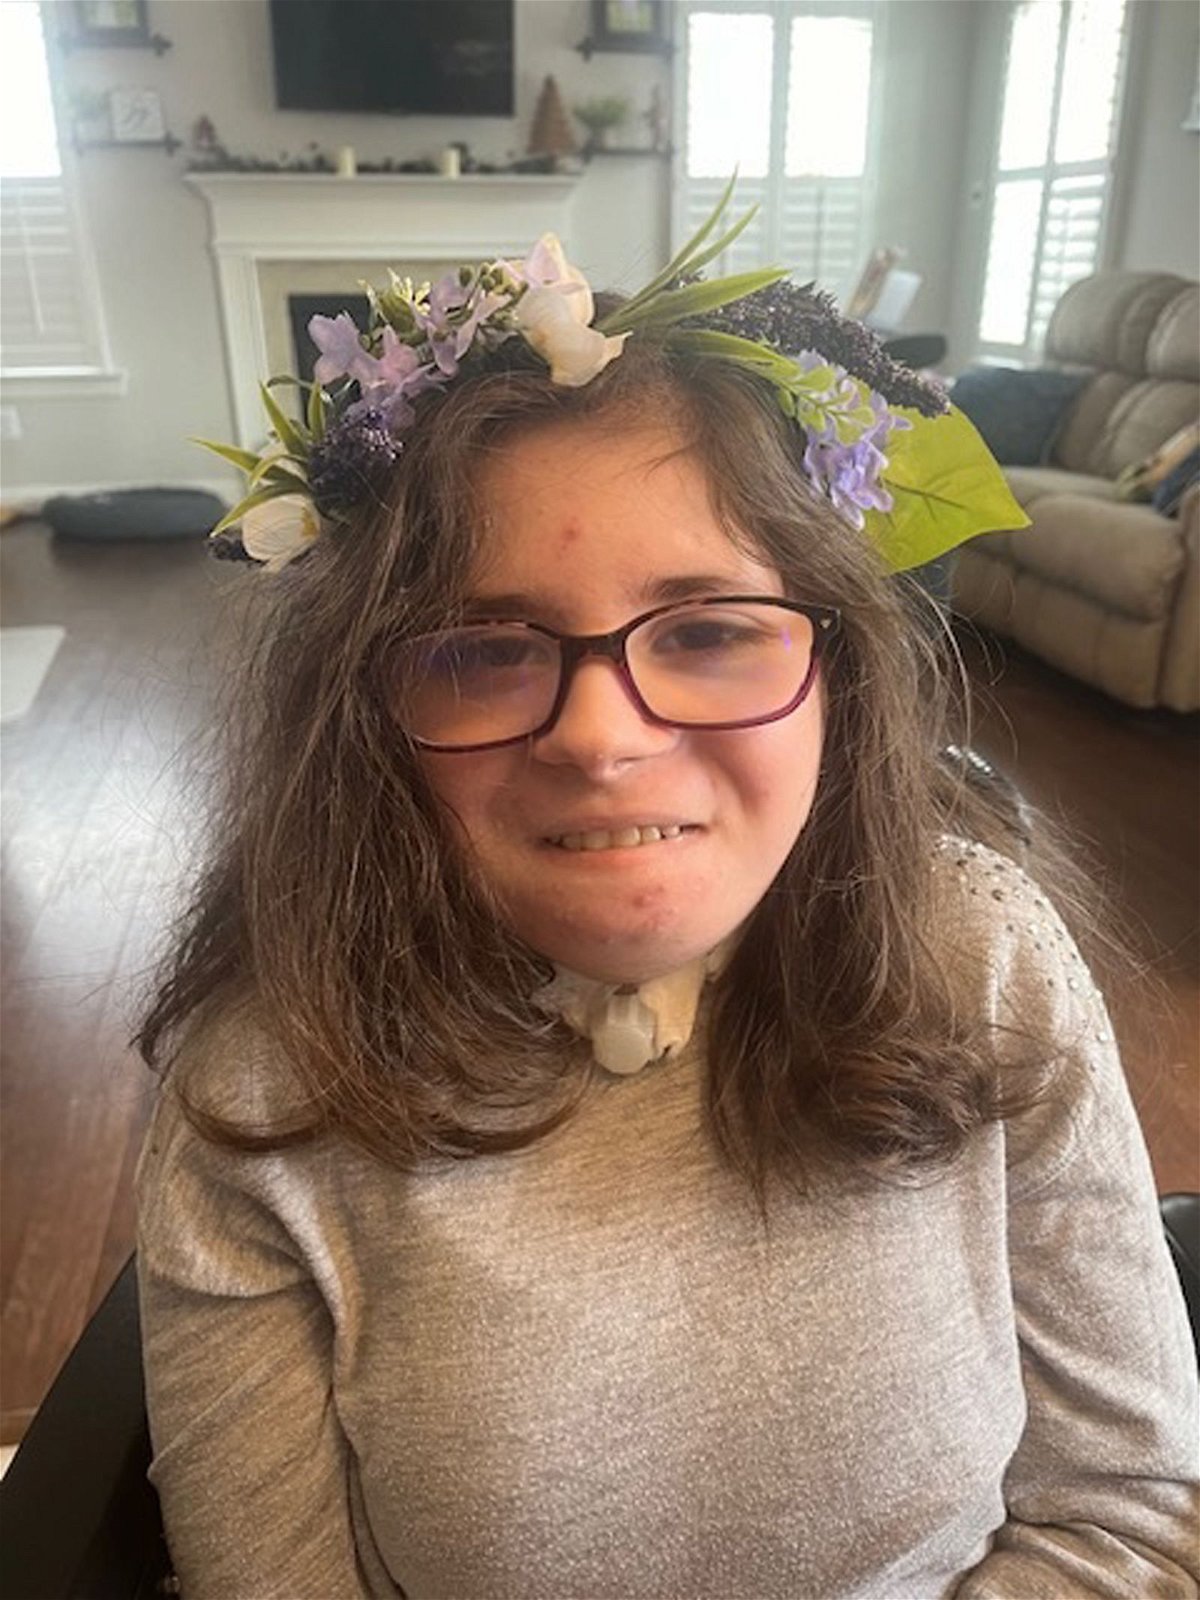 13-year-old Abby needs a daily asthma medication to help her breathe